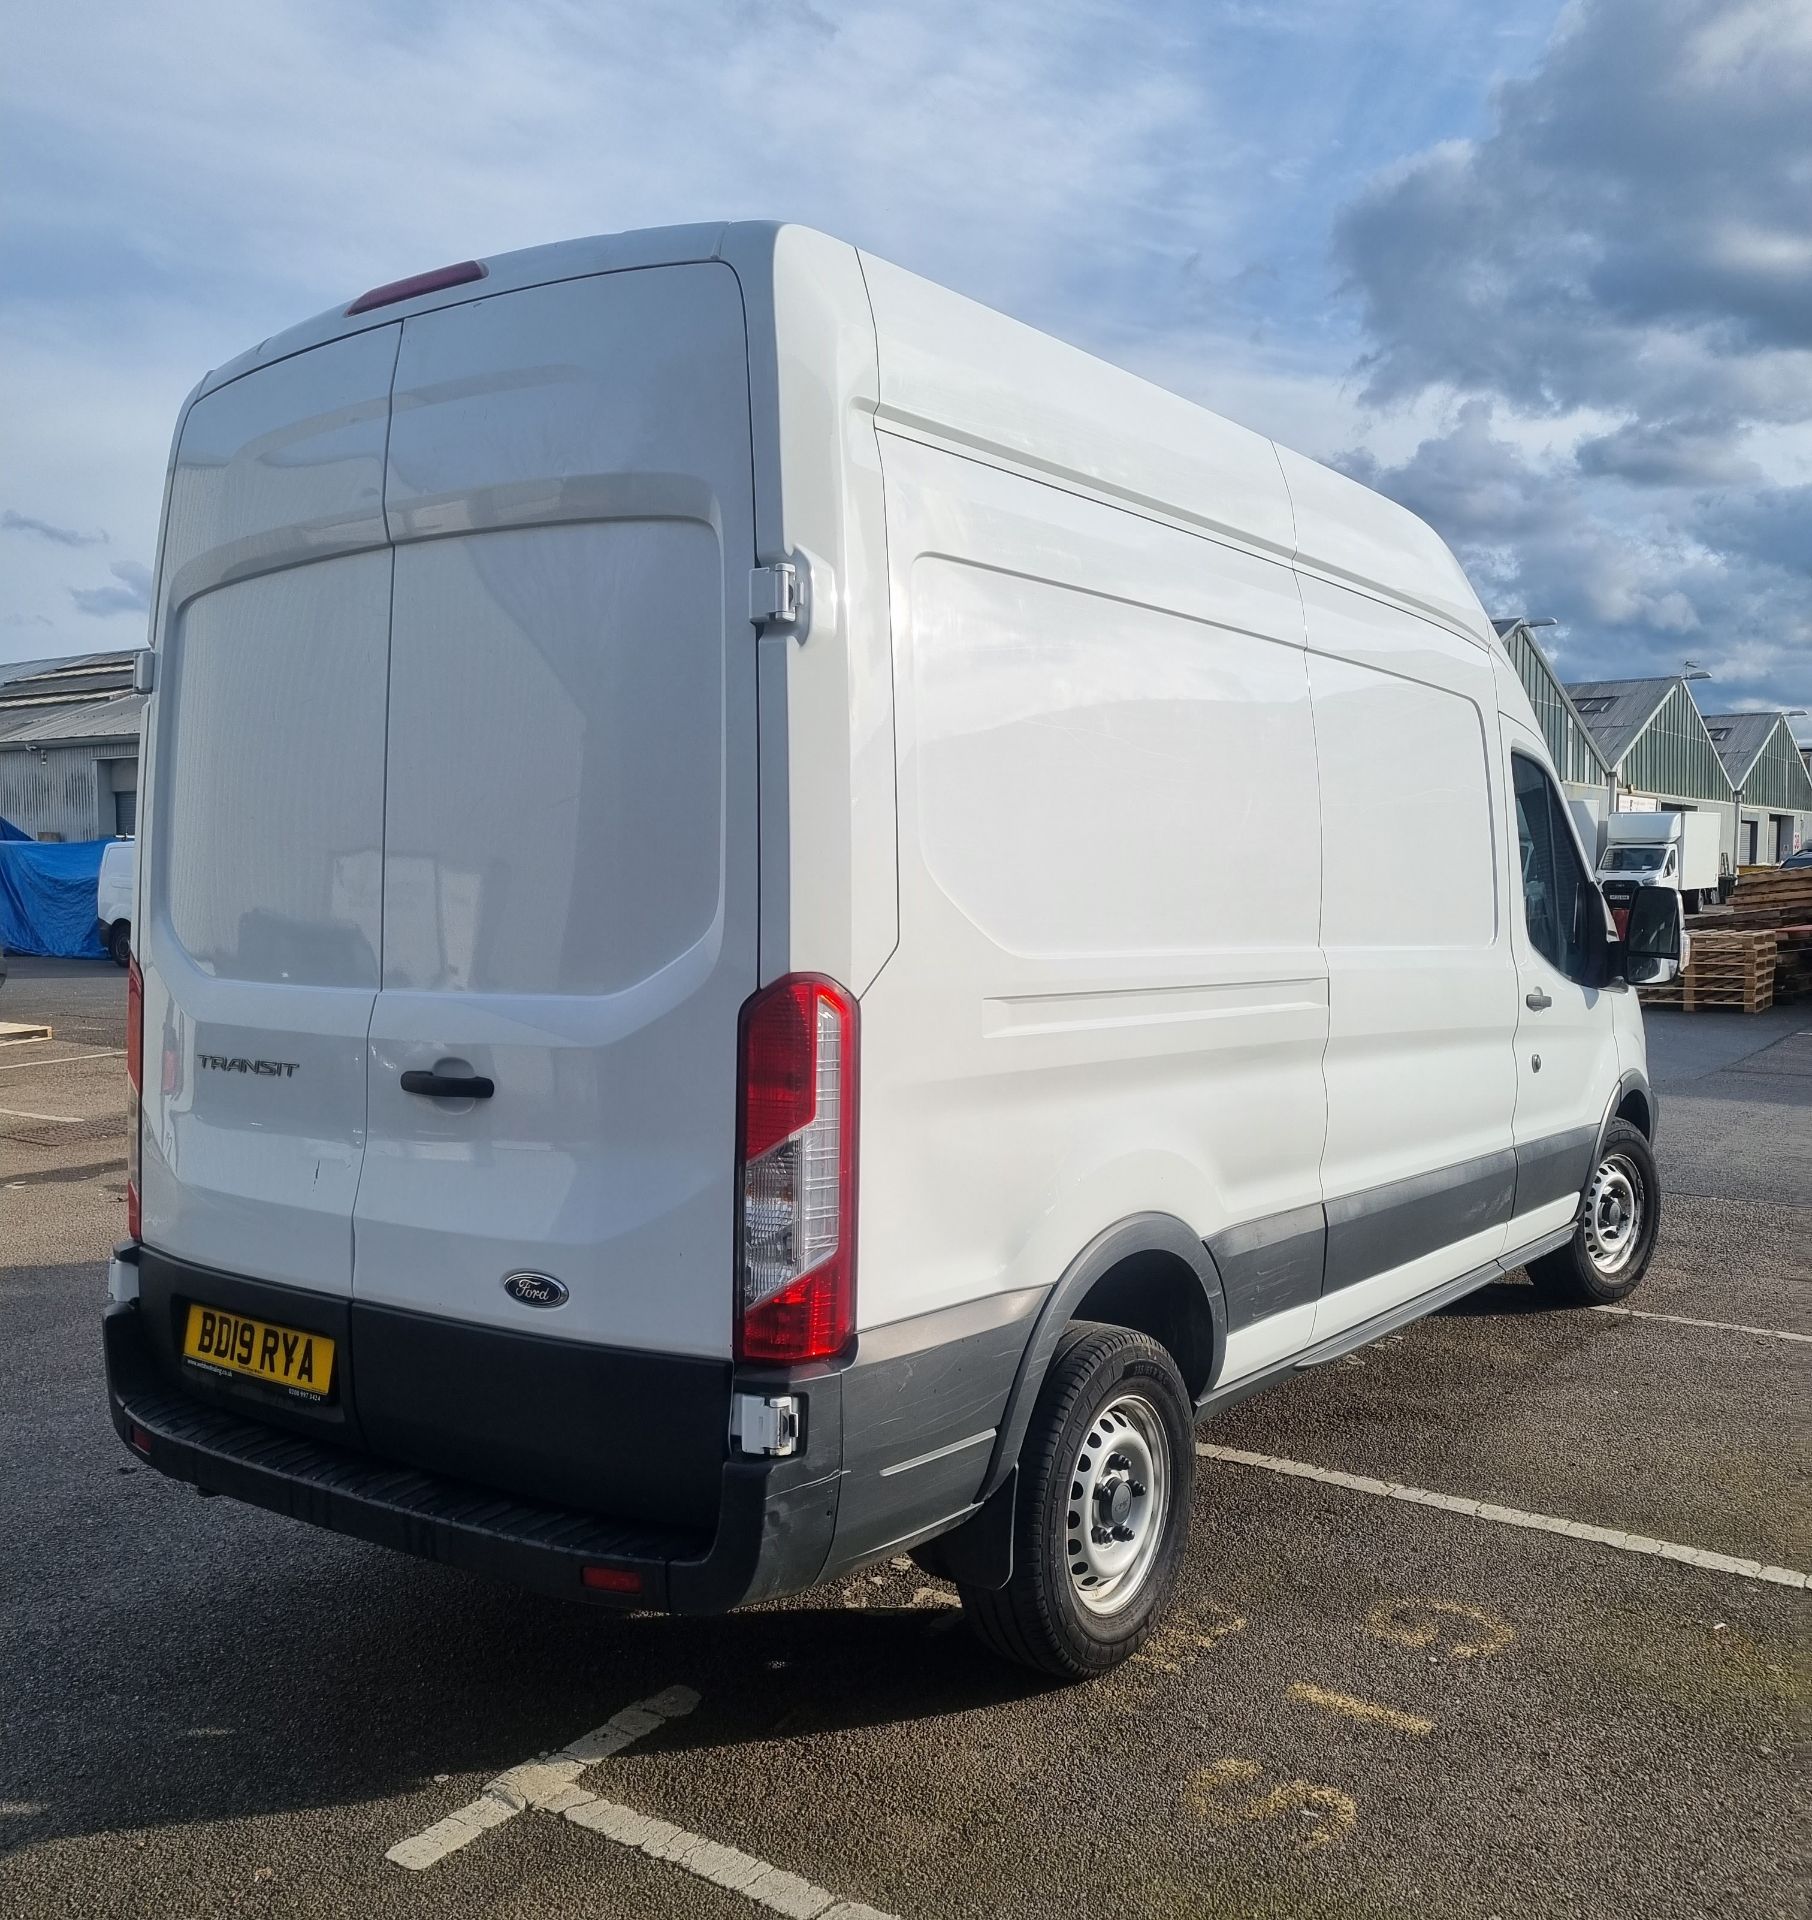 2019 FORD TRANSIT PANEL VAN - 99,507 MILES - SERVICED REGULARLY - READY FOR WORK - Image 6 of 8